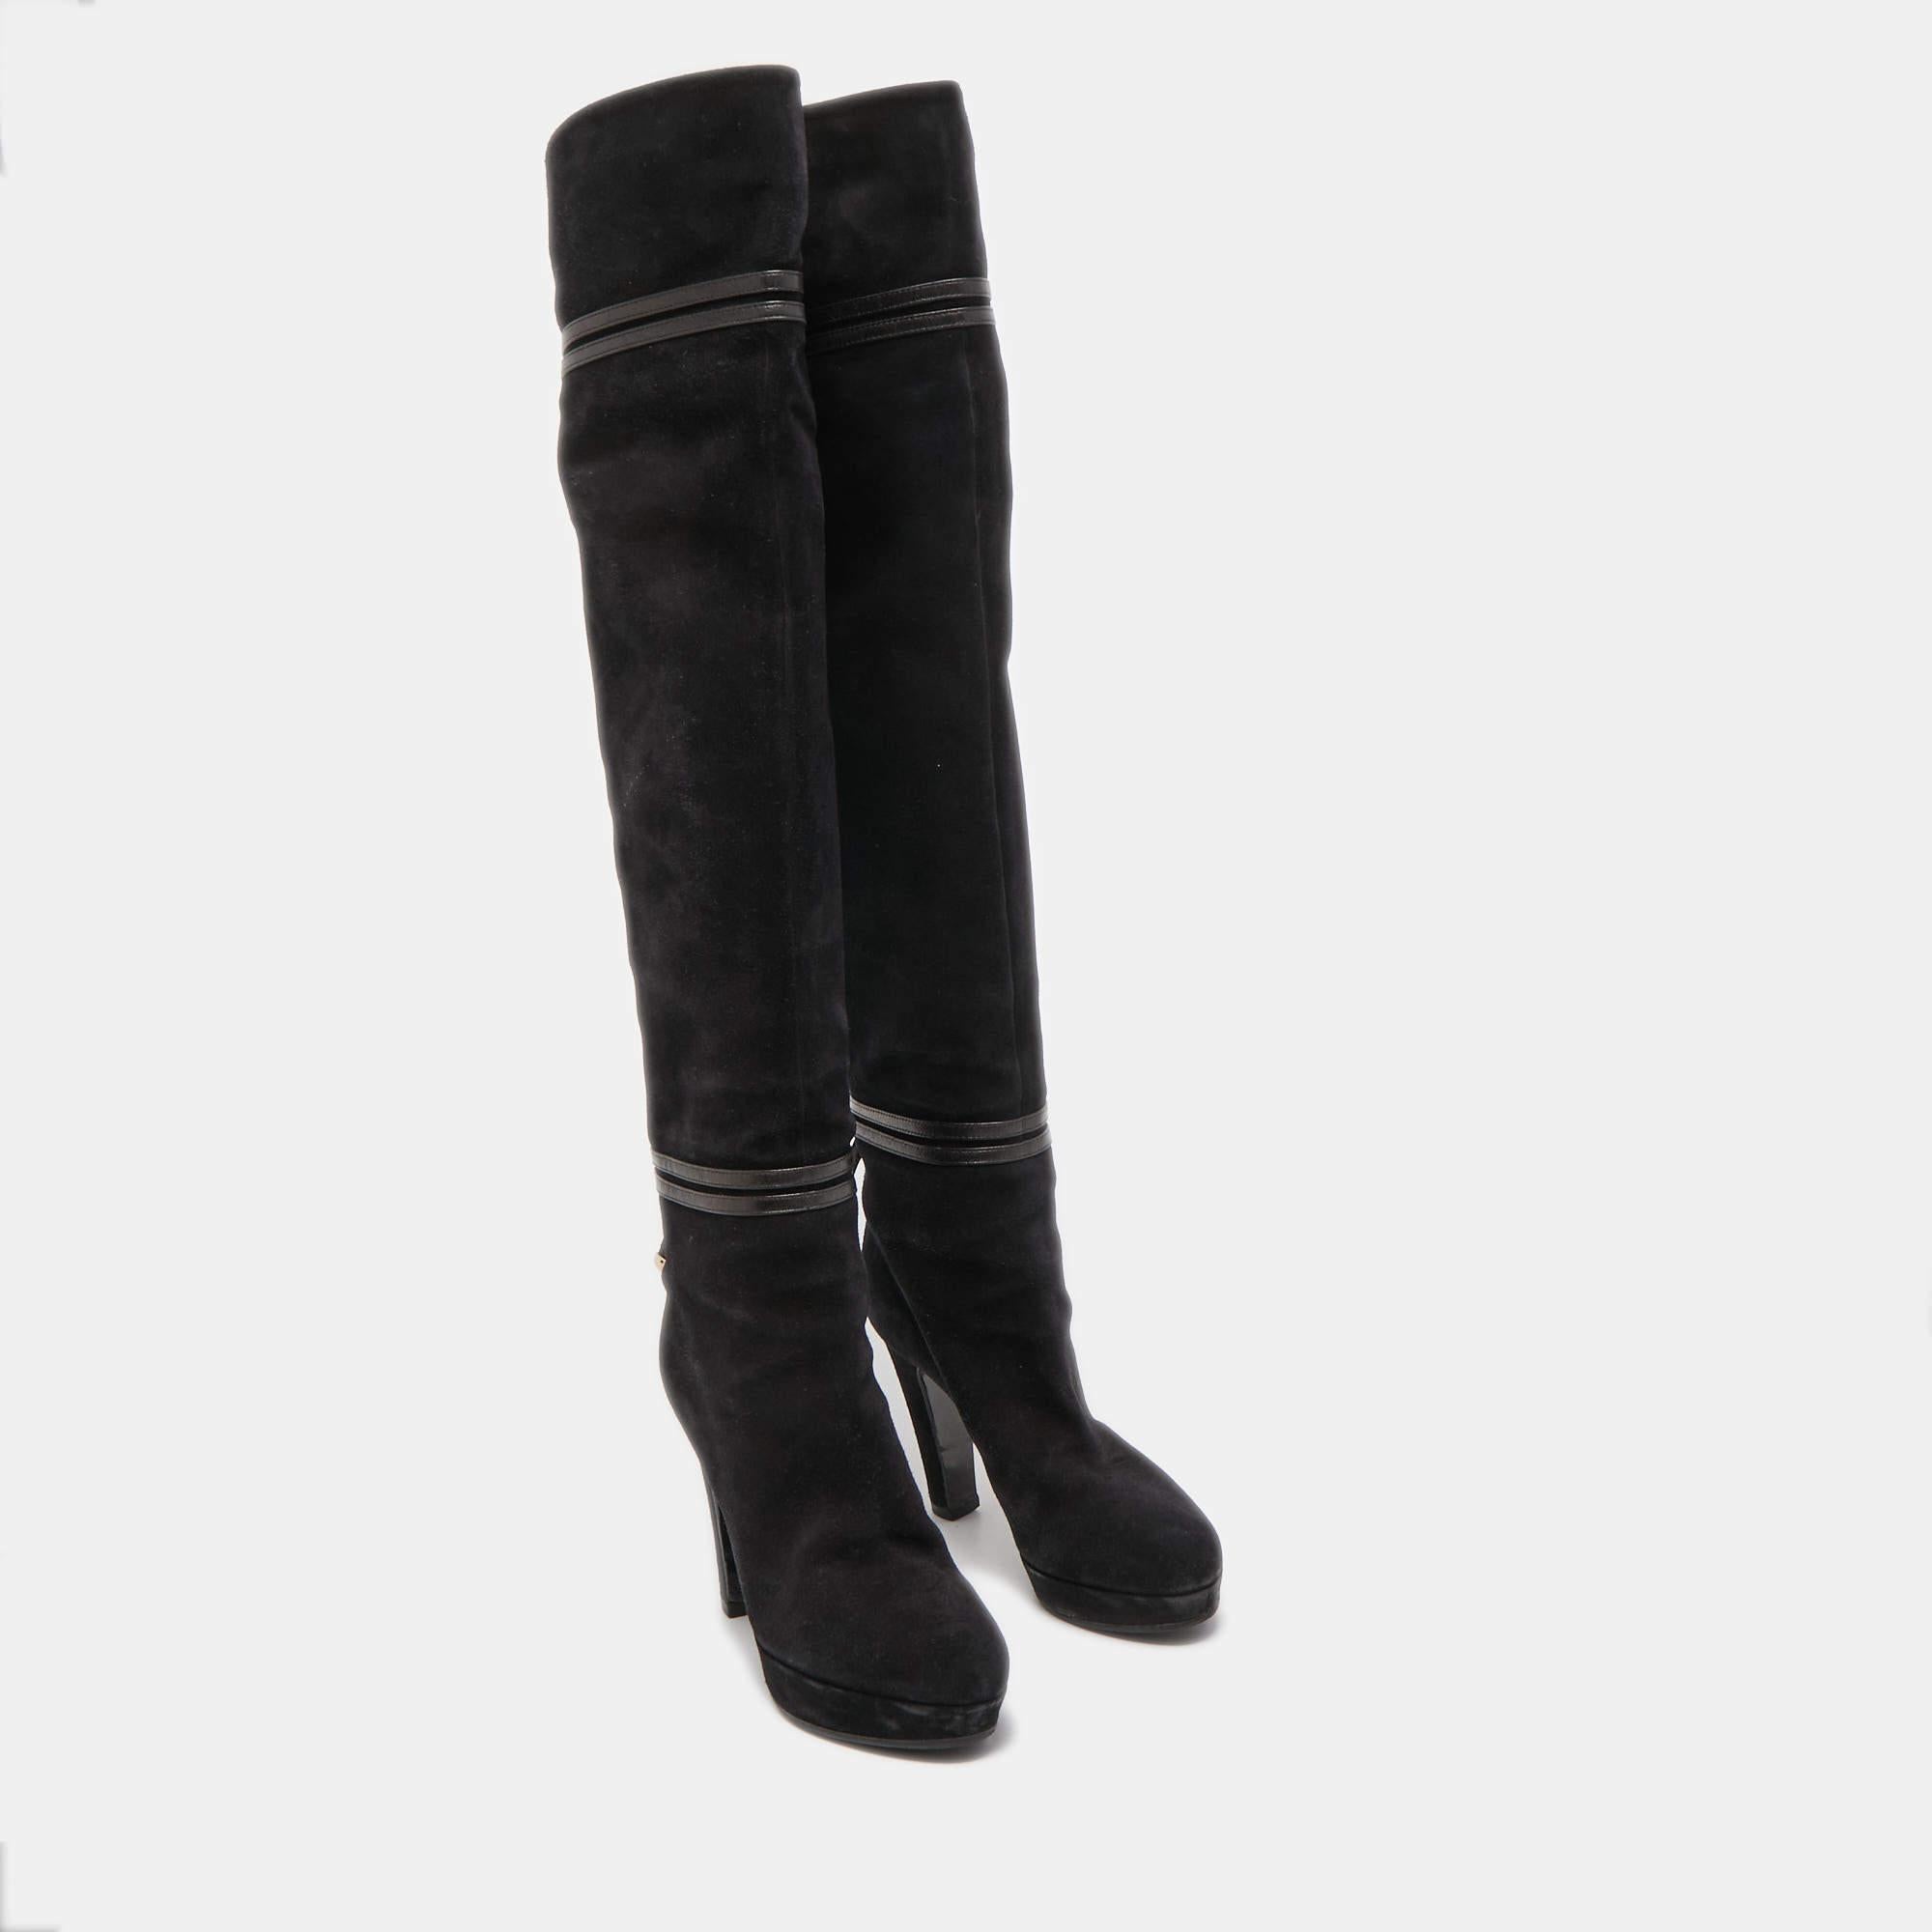 Gucci Black Suede and Leather Bow Over The Knee Boots Size 36.5 Unisexe en vente